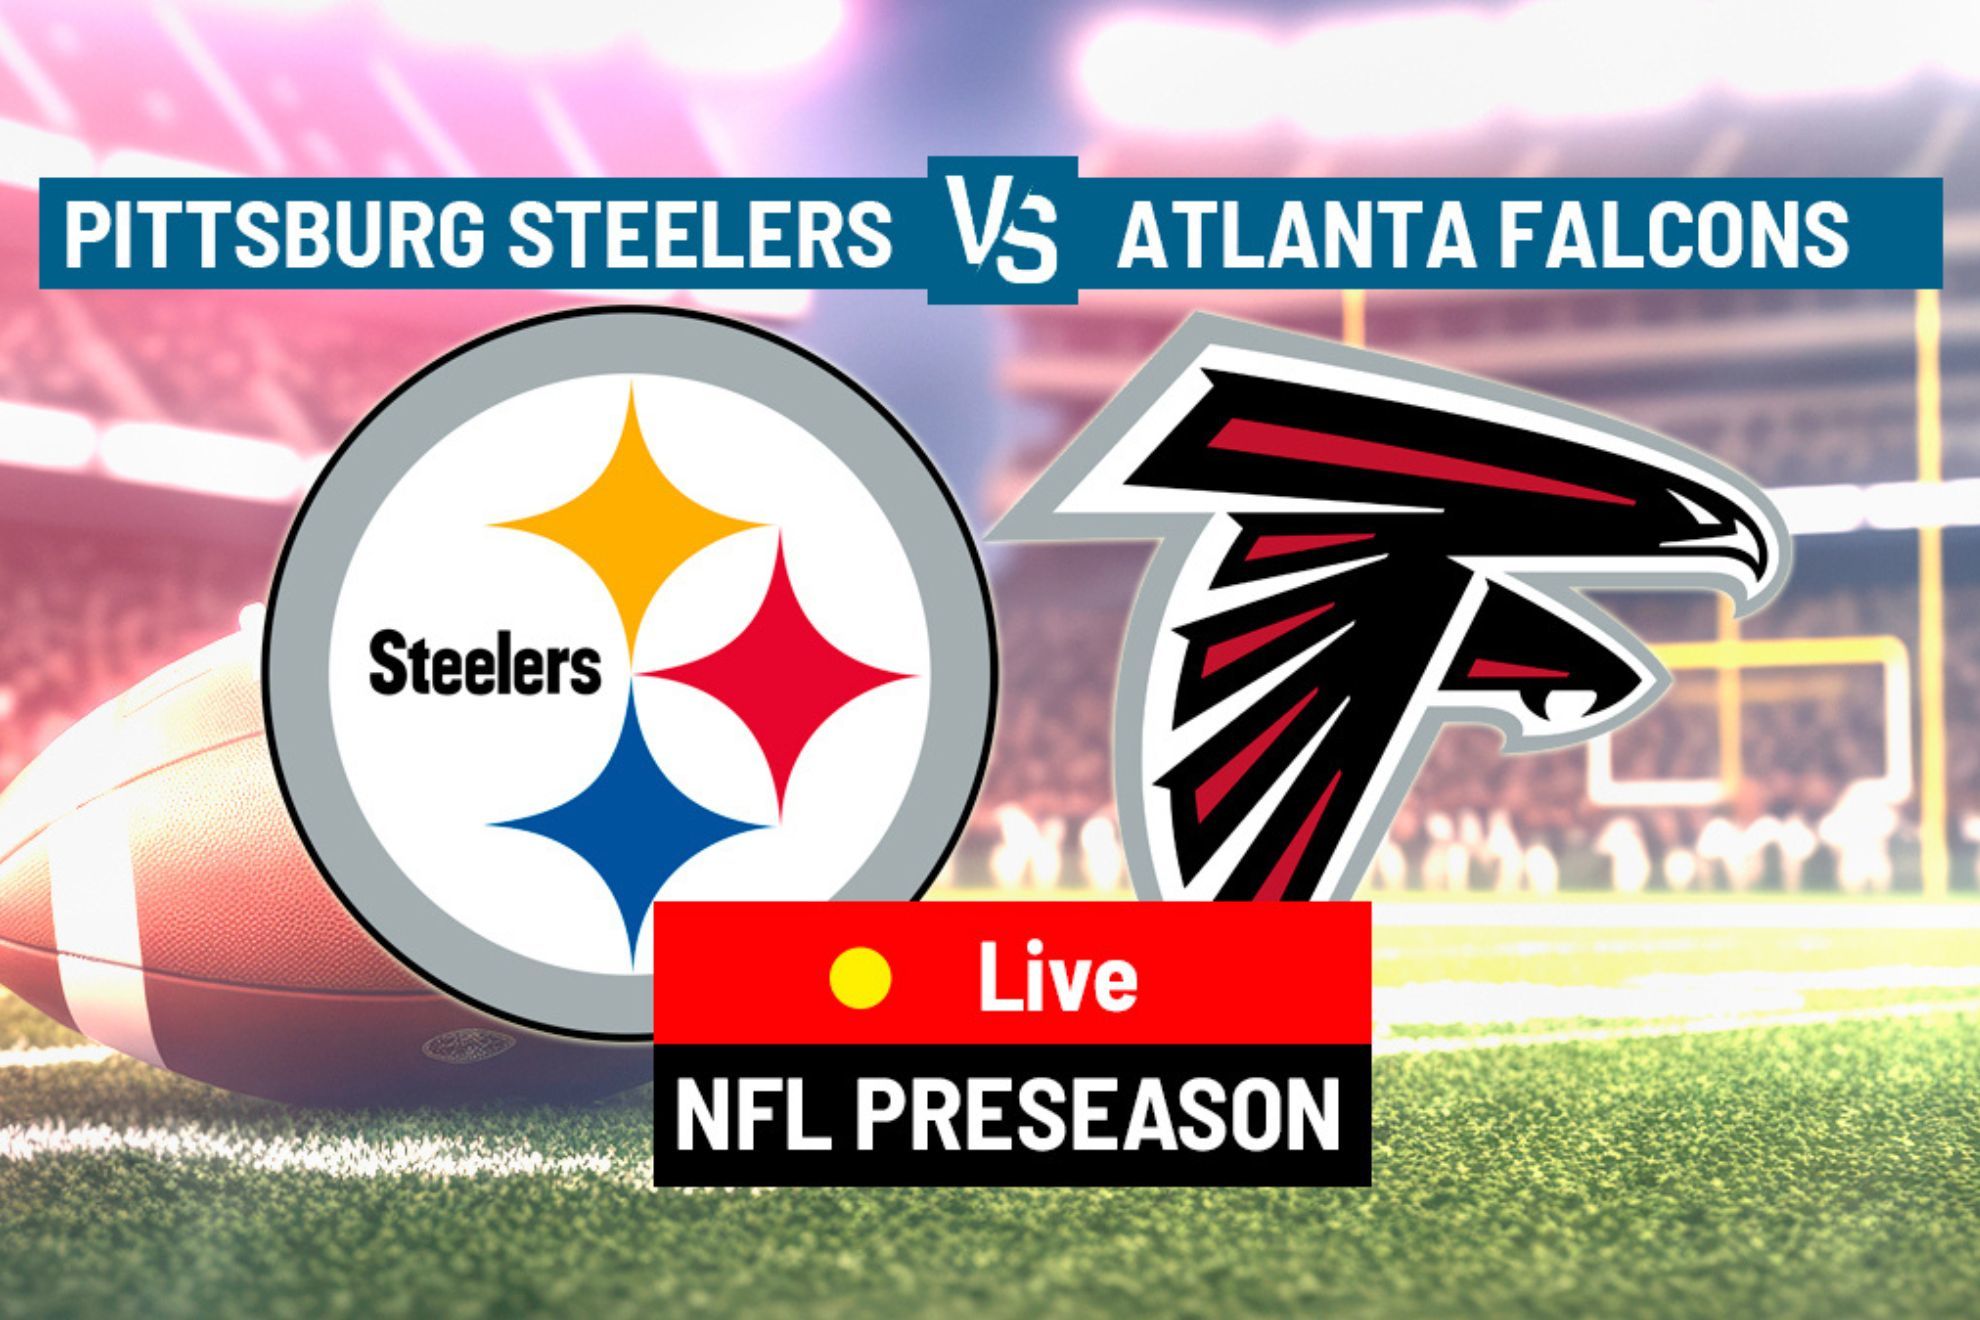 Steelers - Falcons: Final score, stats and highlights of preseason game